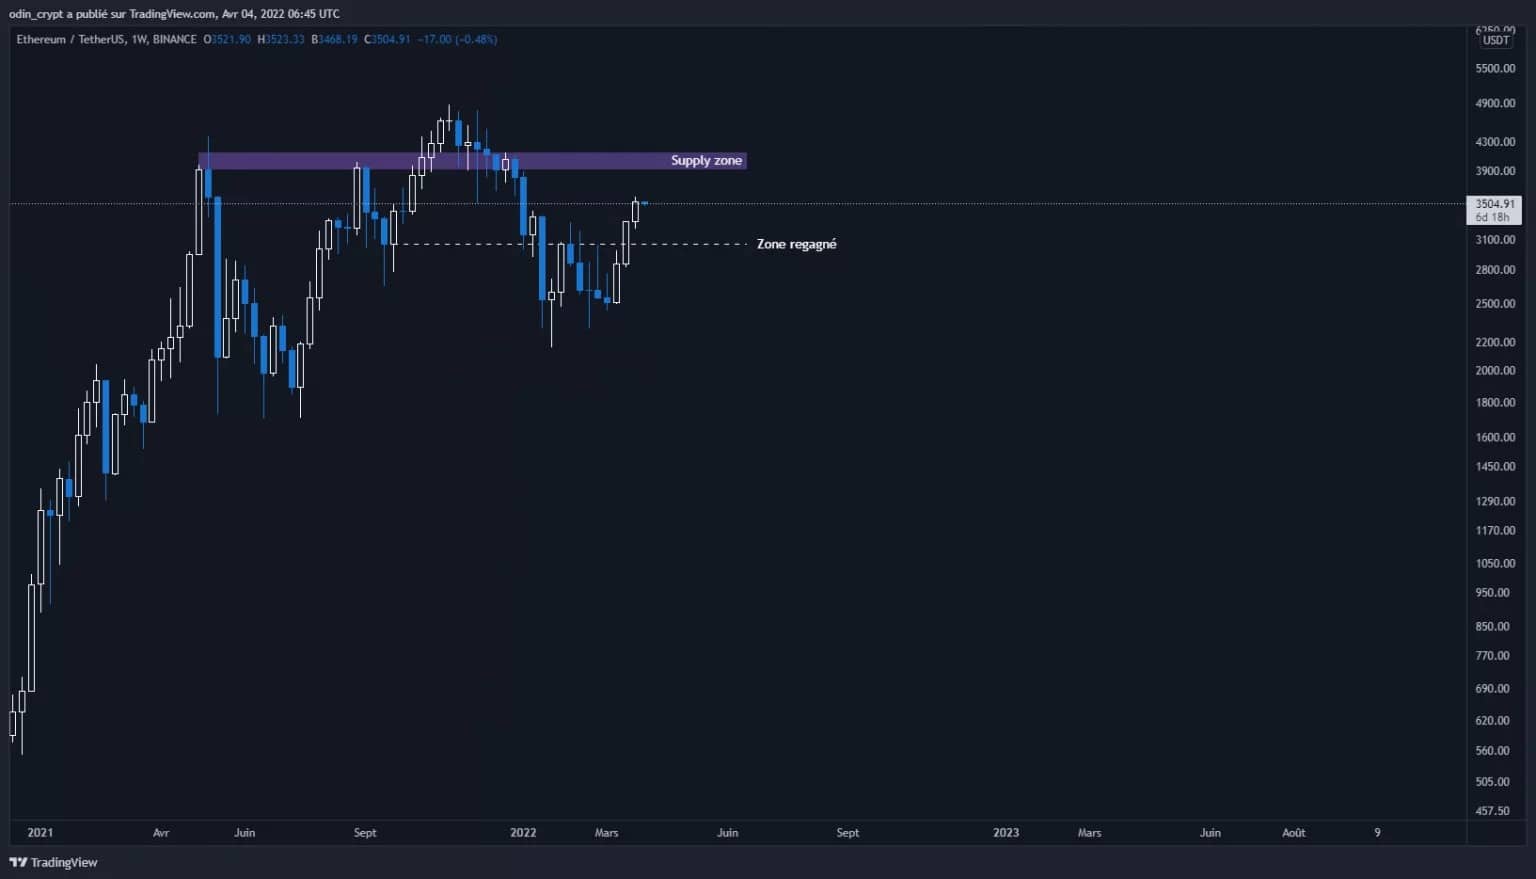 Ether (ETH) analysis in 1W